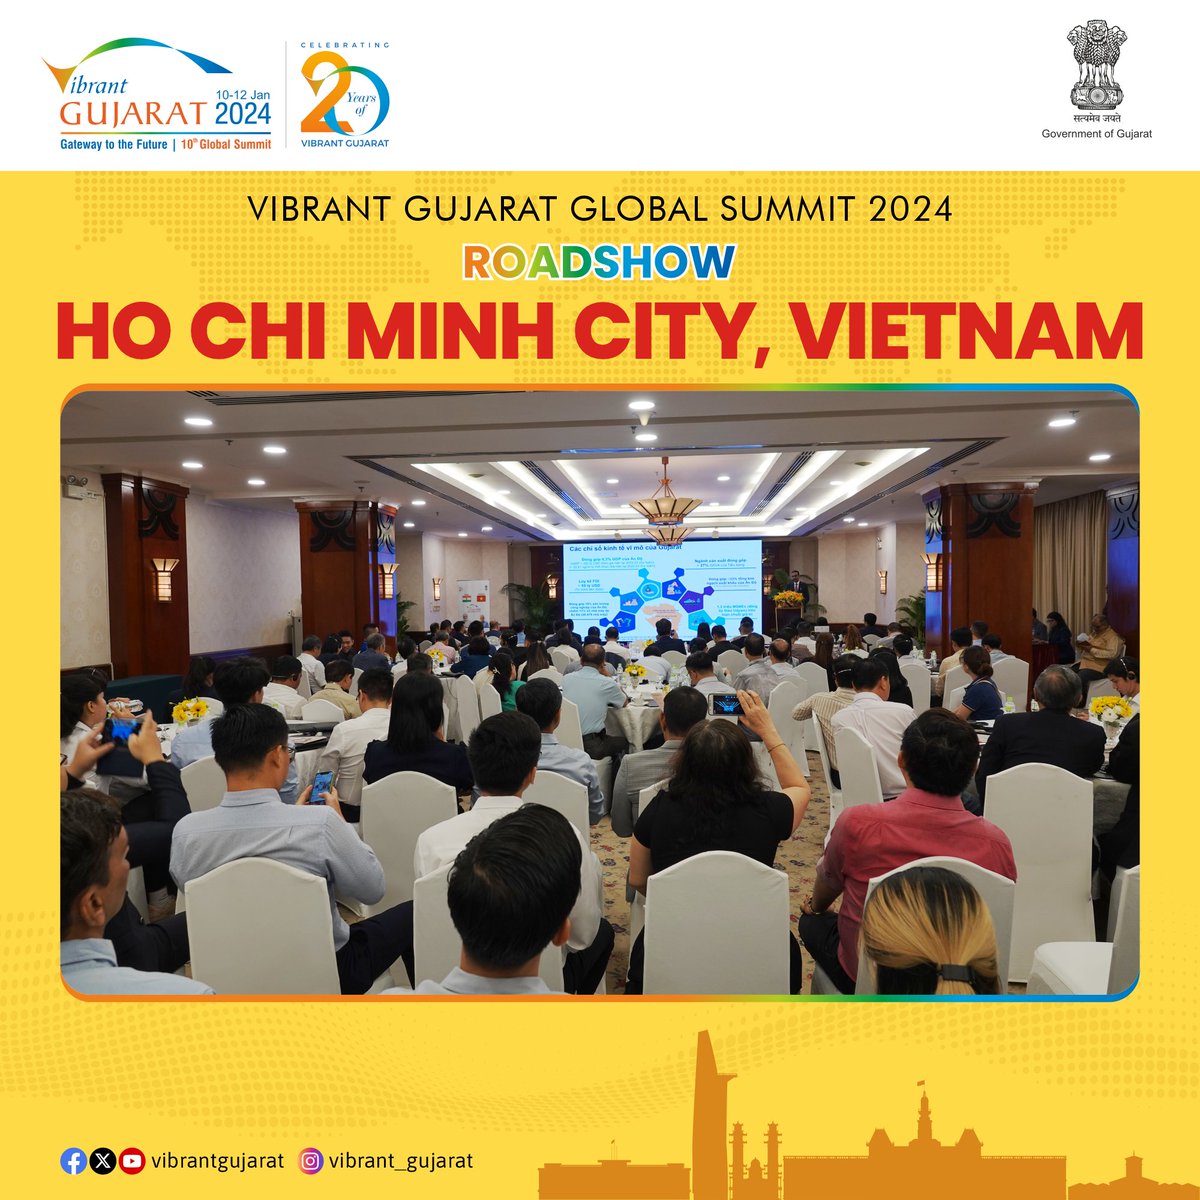 The #VGGS2024 Roadshow at 📍Ho Chi Minh City in #Vietnam received an overwhelming response. With the participation of 1⃣0⃣0⃣+ high-profile delegates from various sectors, including pharmaceuticals, ceramics, logistics, electronics, renewable energy, and more(1/2) @AmbHanoi